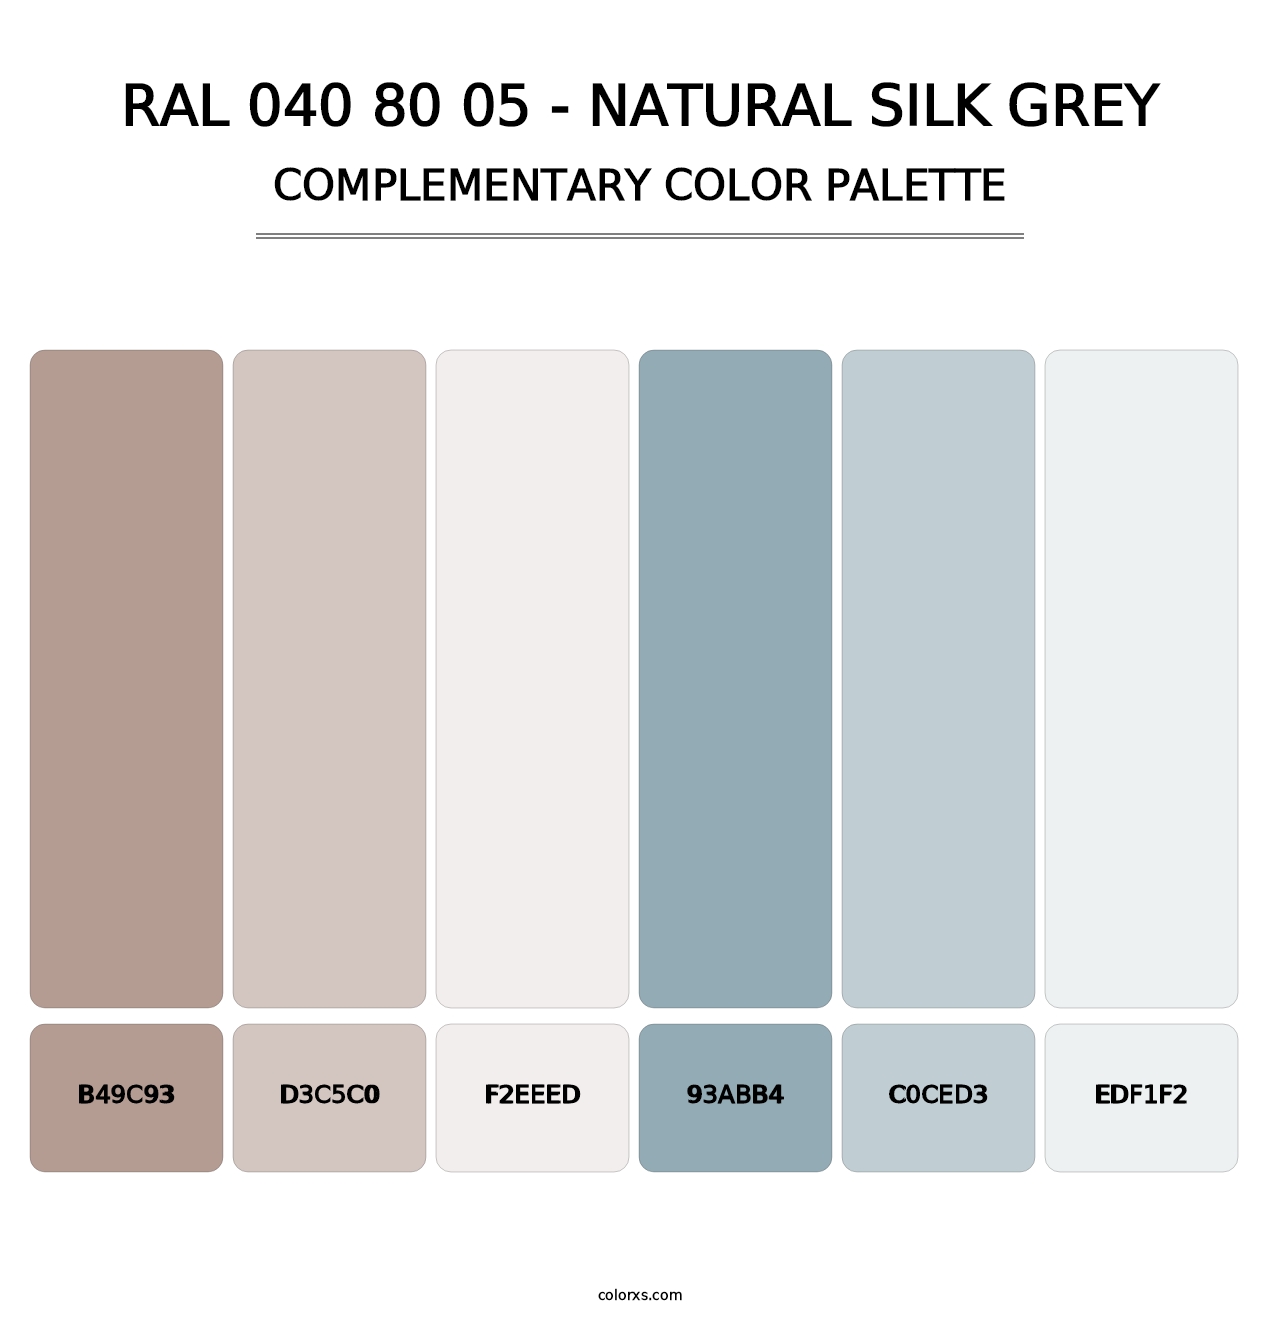 RAL 040 80 05 - Natural Silk Grey - Complementary Color Palette